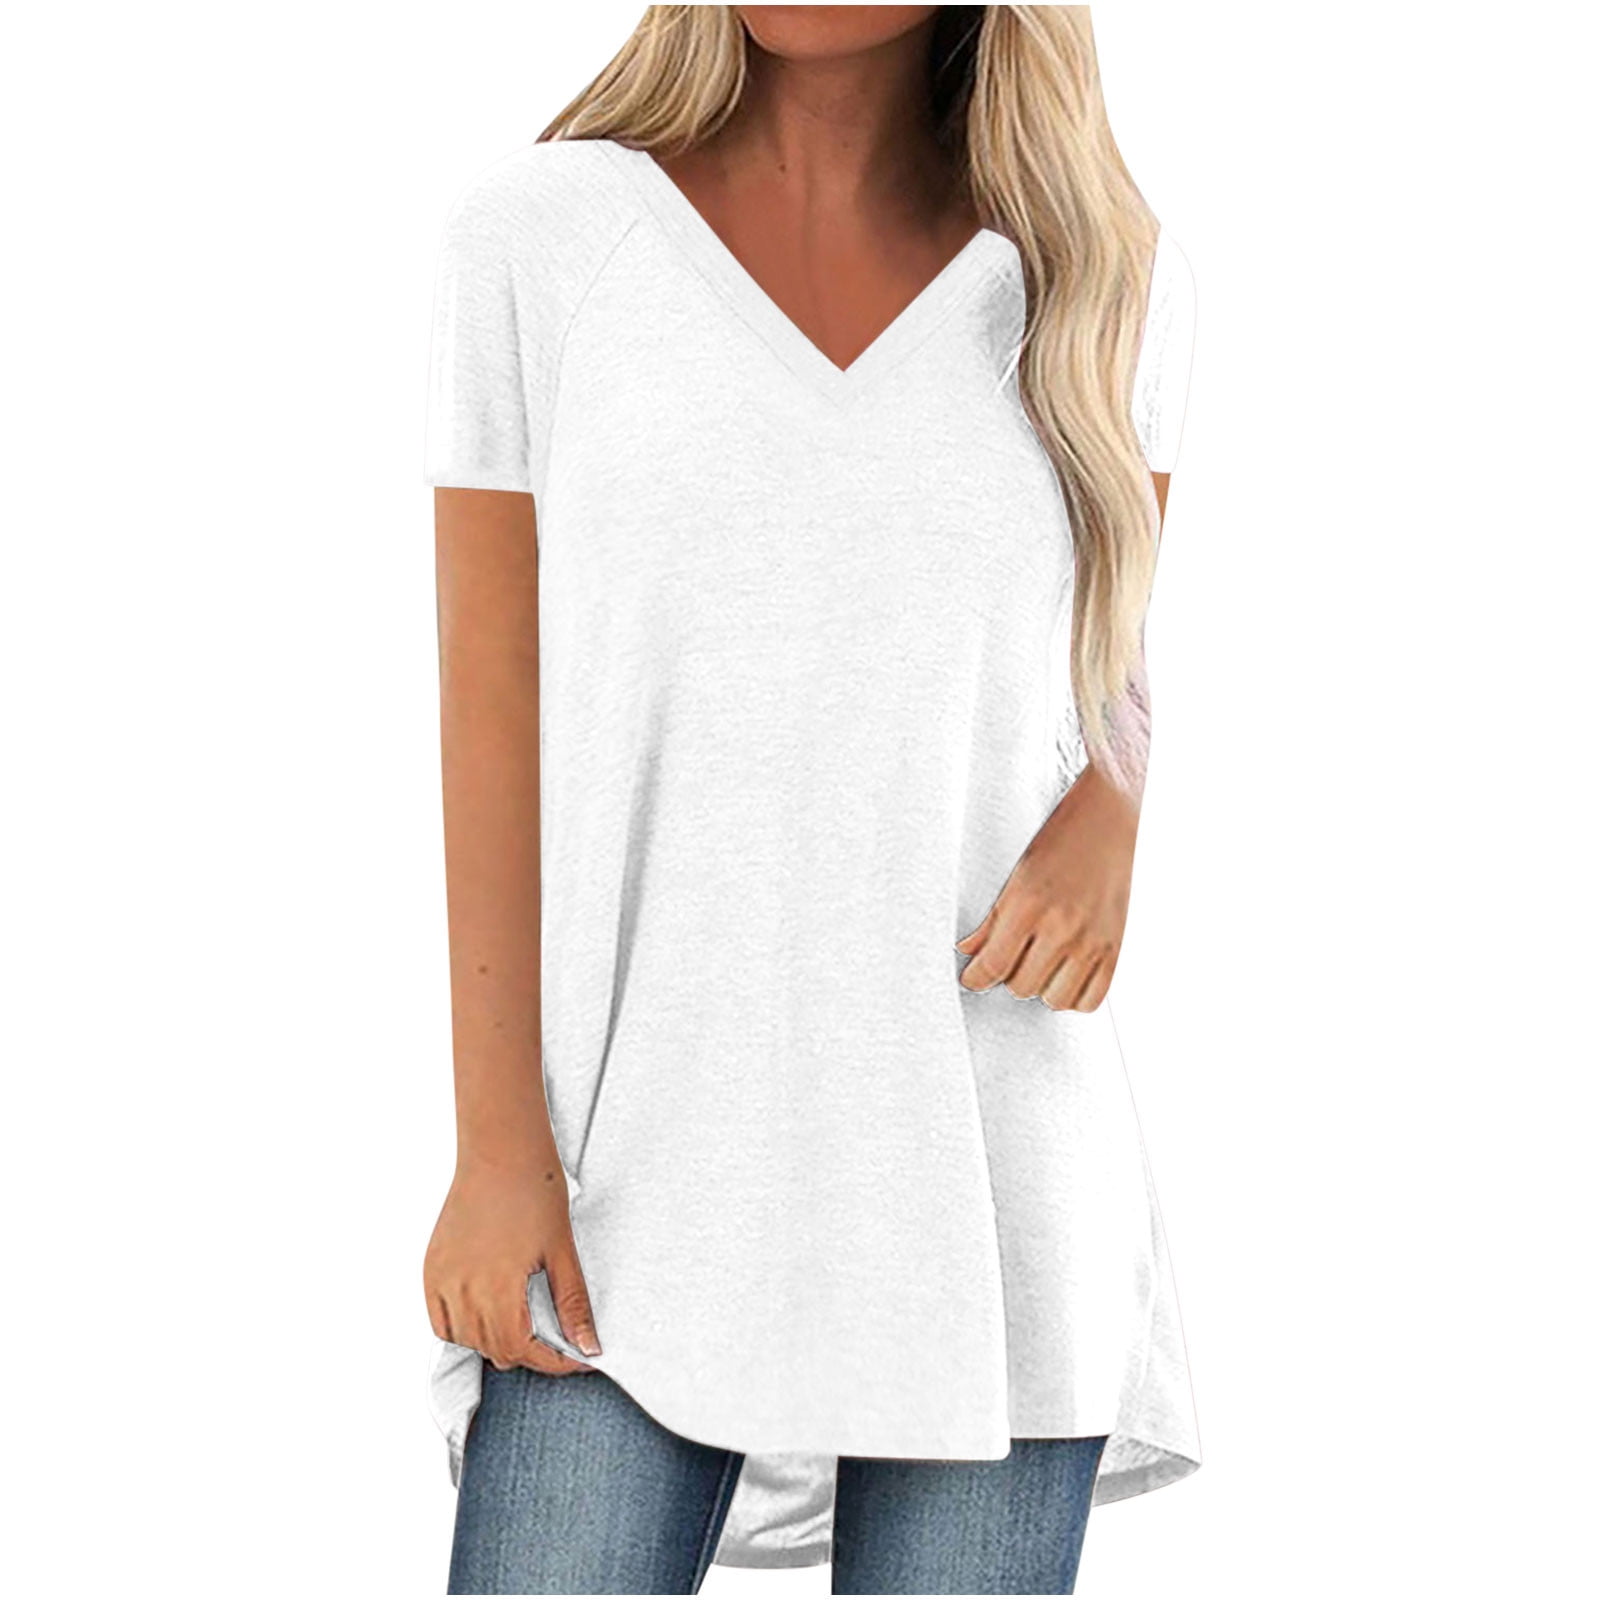 Yuzhih Oversized Tshirts for Women V Neck Blouses Casual Loose Comfy ...